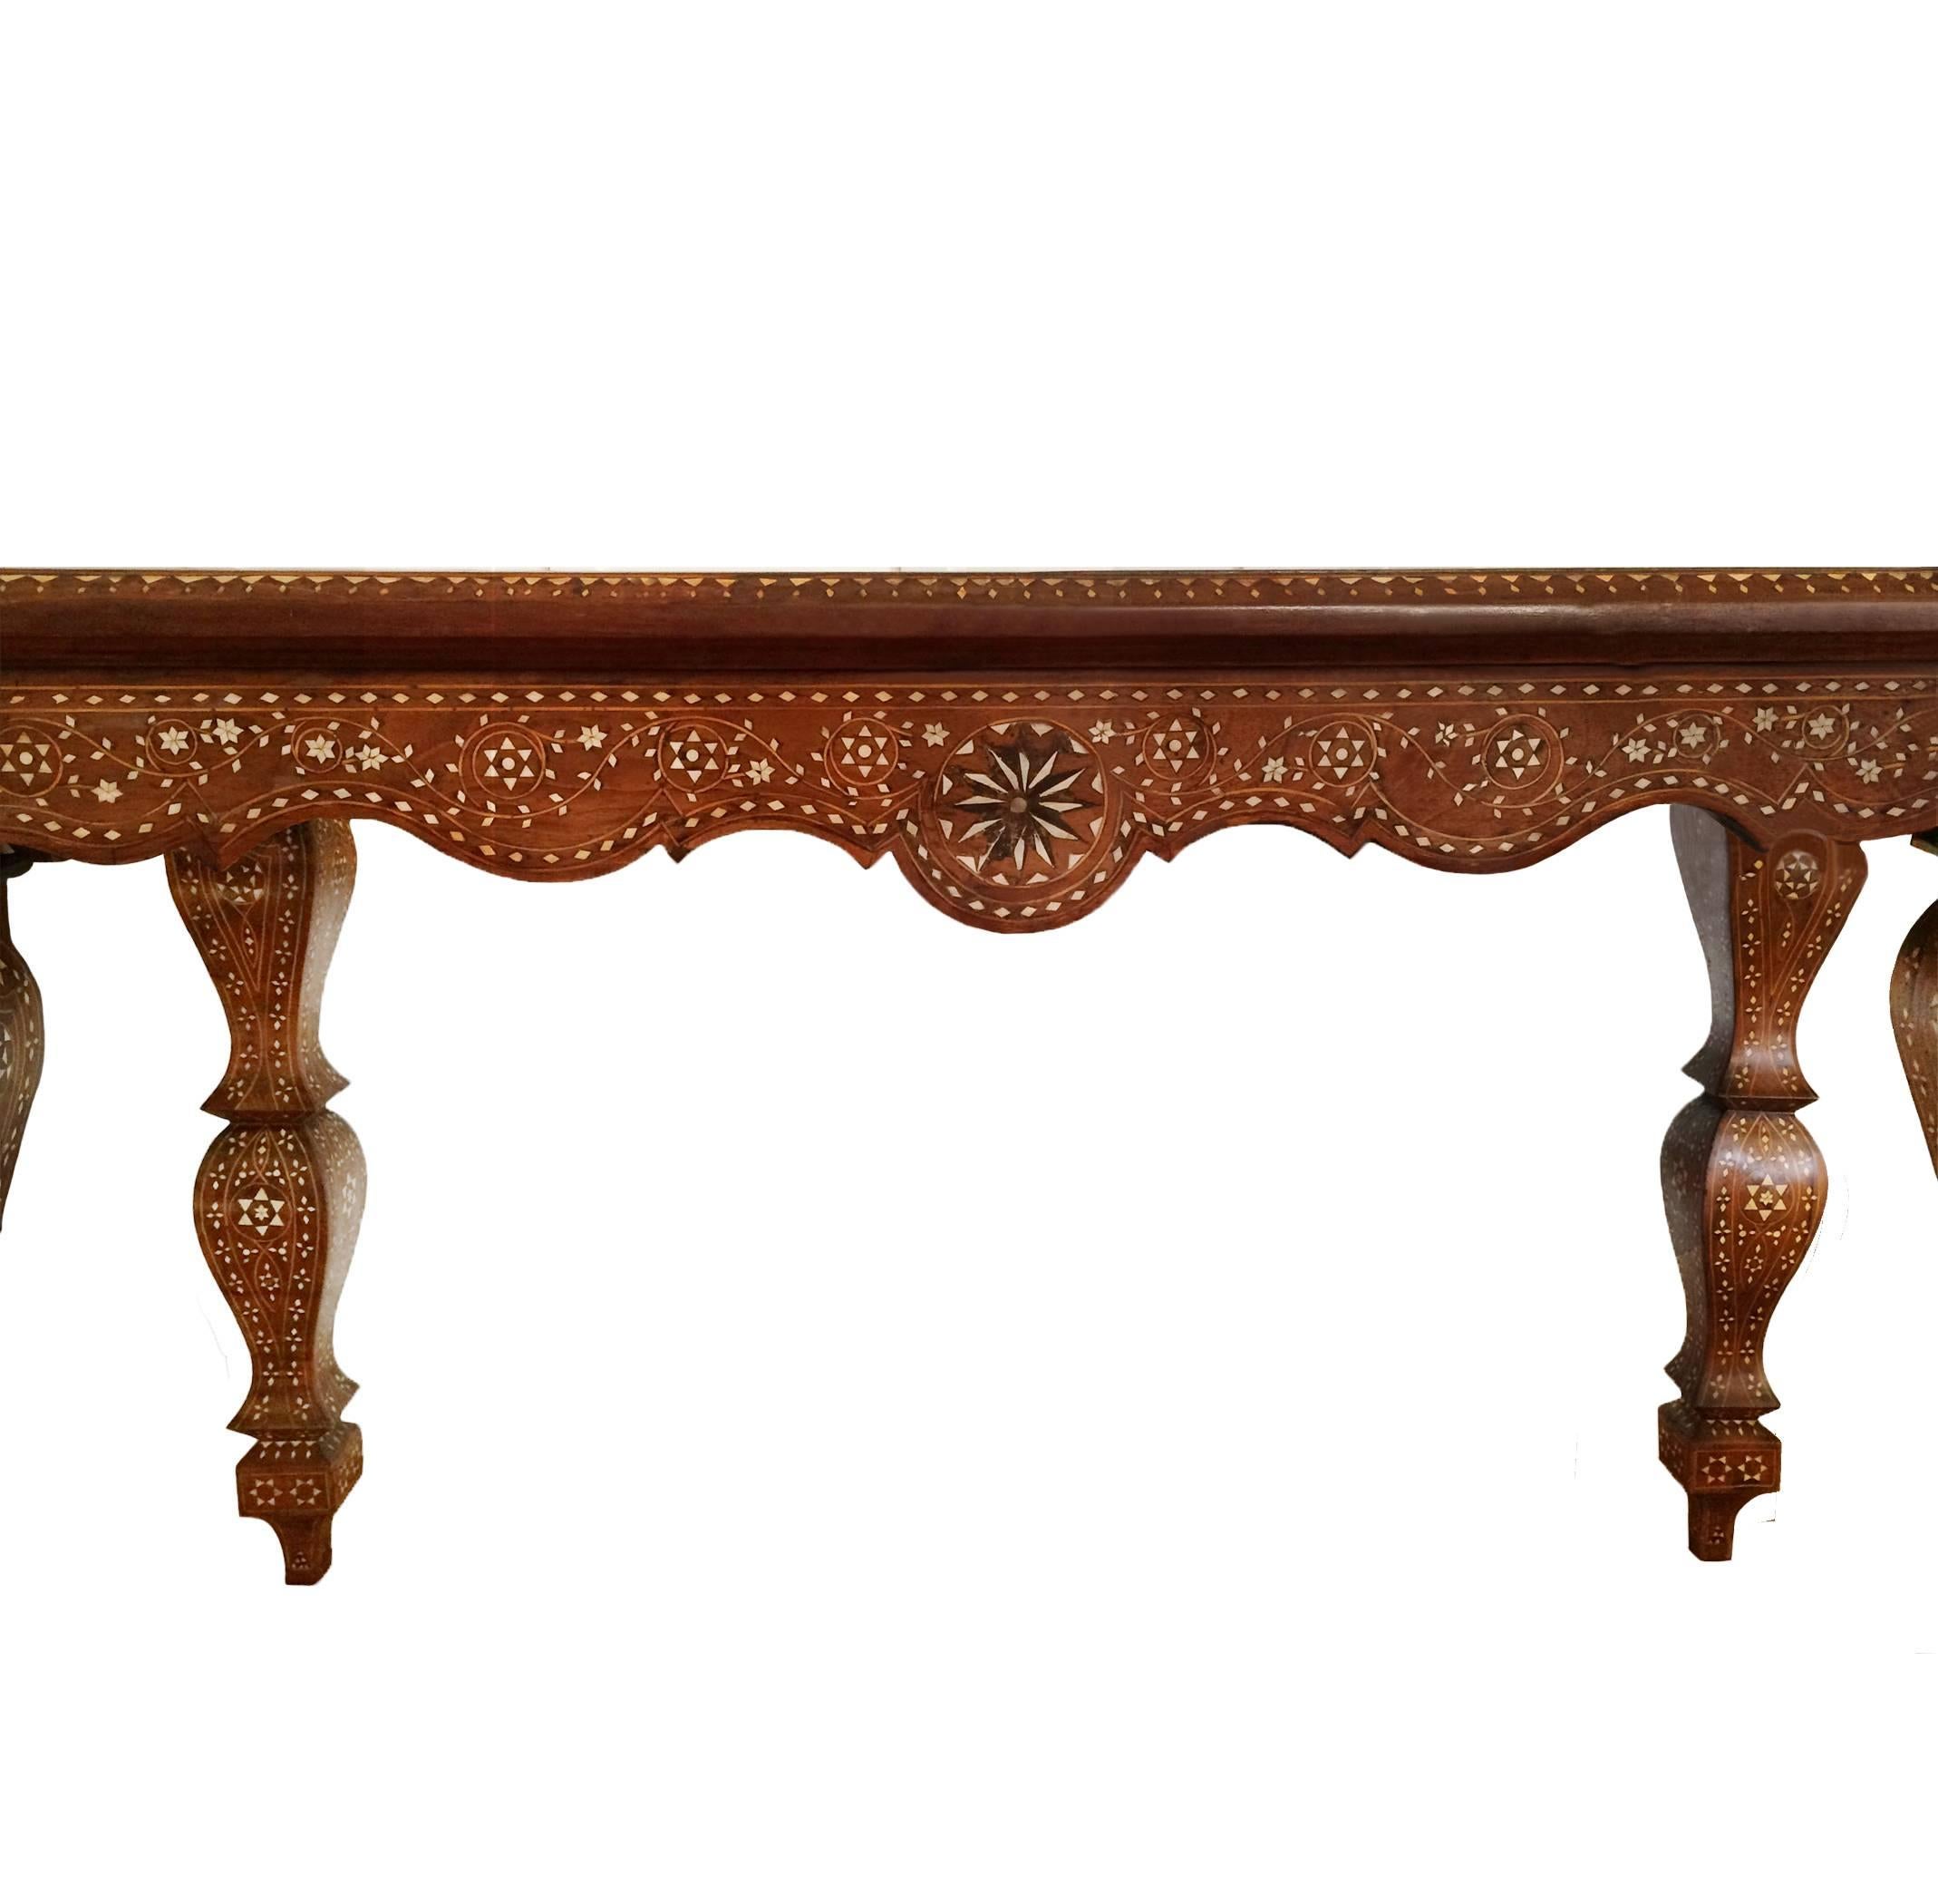 19th Century Italian Inlay Table in the Baroque Style